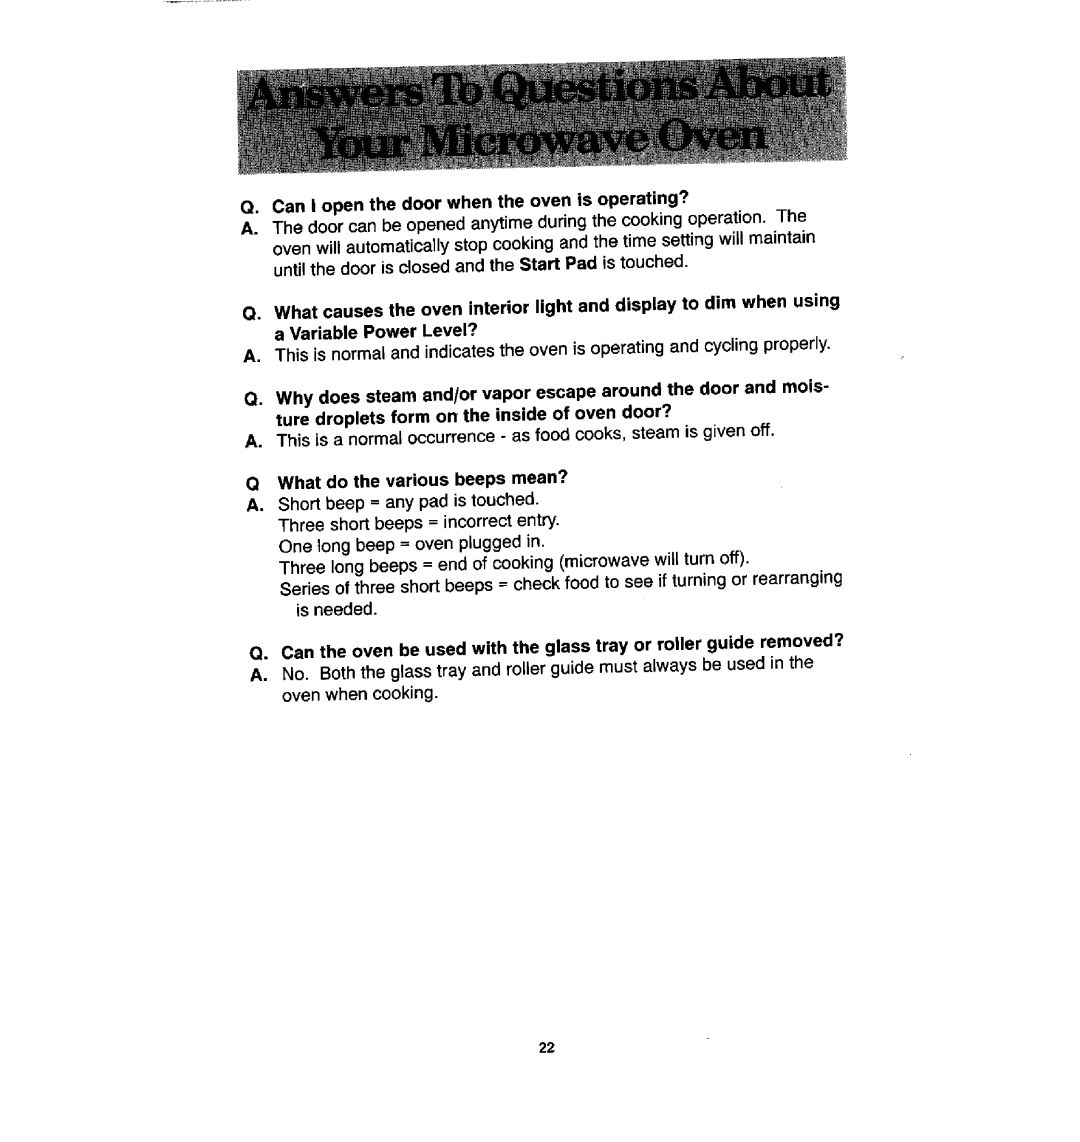 Jenn-Air M170 manual Q. Can I open the door when the oven is operating? 